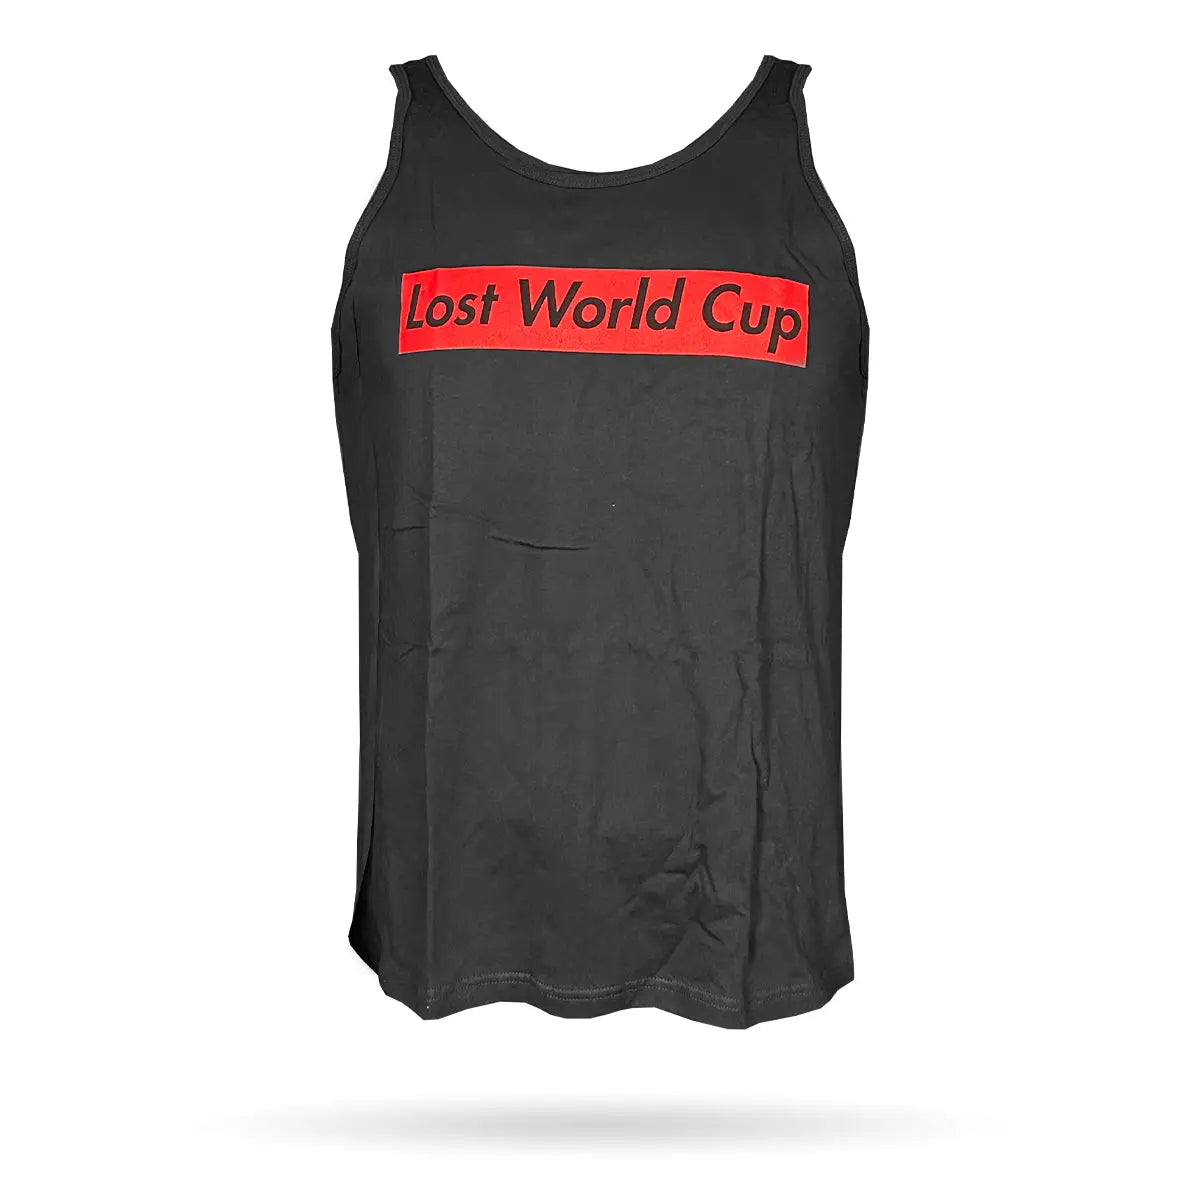 LOST WORLD CUP - TANK TOP